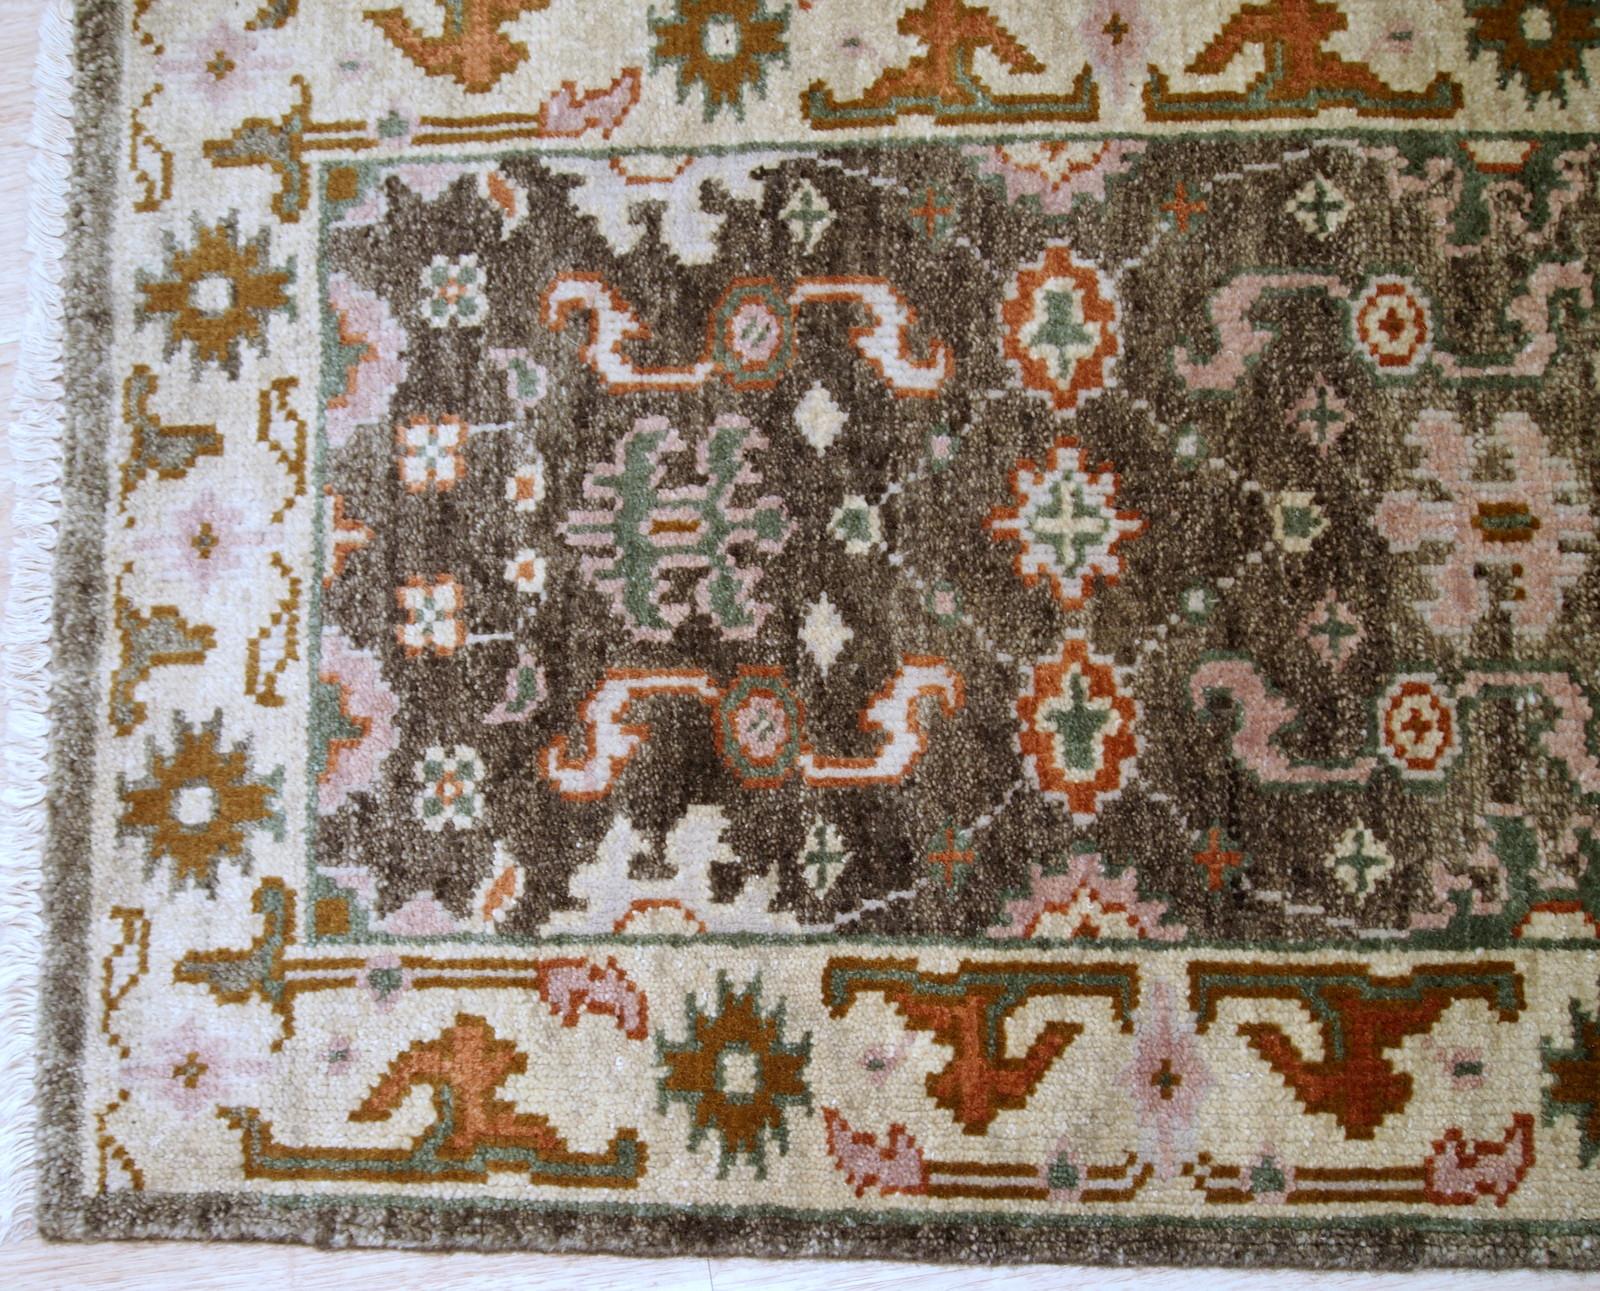 Handmade vintage Indo-Mahal mat in wool. The rug is from the end of 20th century in original good condition.

- Condition: Original good,

- circa 1980s,

- Size: 2.1' x 3.2' (64 cm x 97 cm),

- Material: Wool,

- Country of origin: